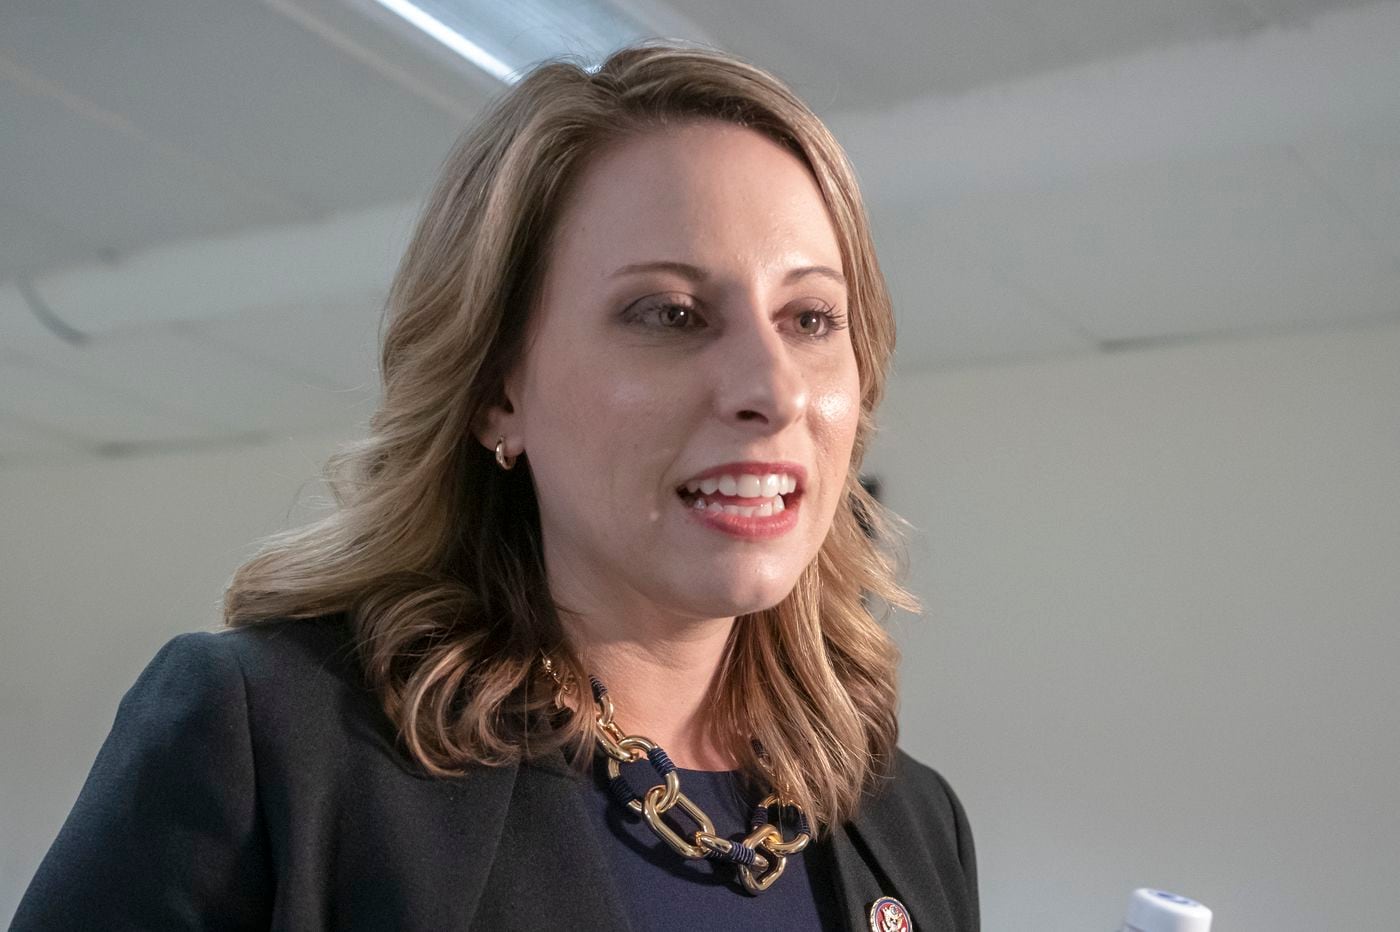 Best Revenge Porn - Rep. Katie Hill resigned because she behaved unethically ...